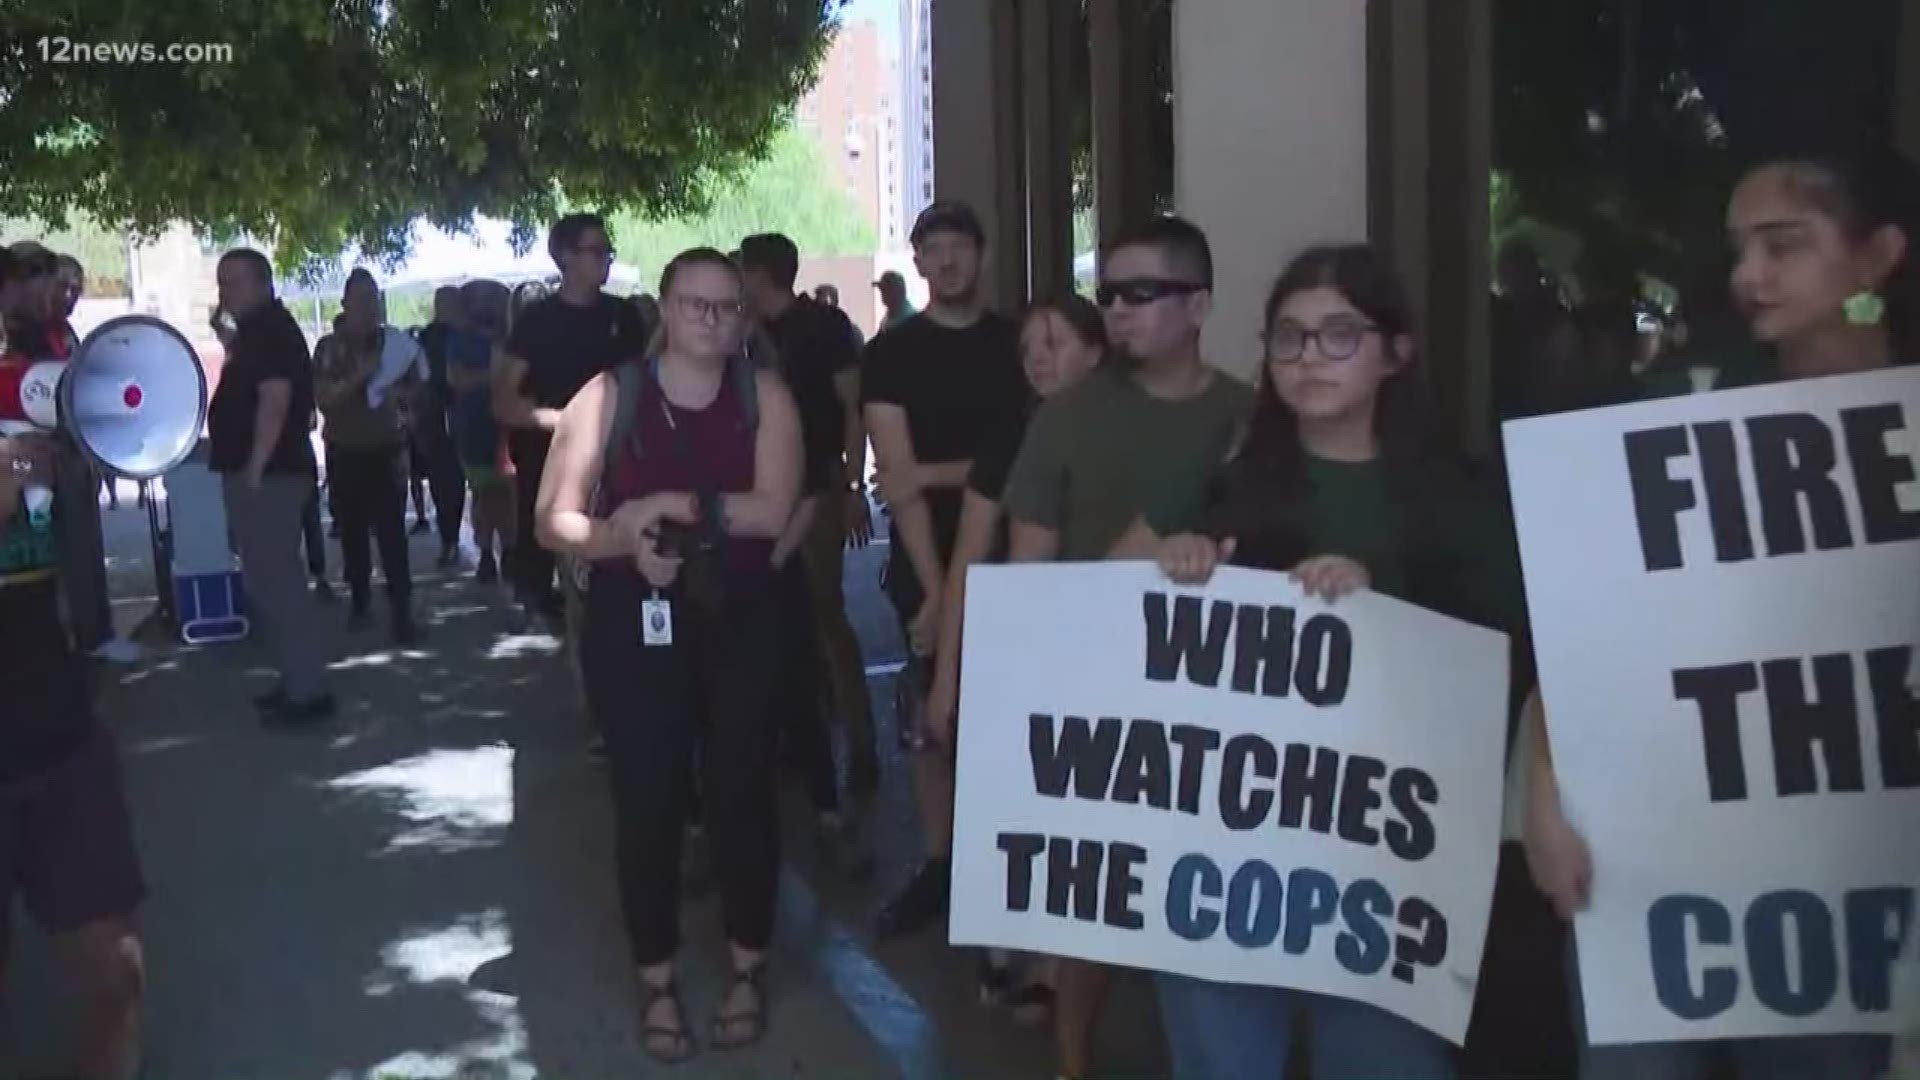 Protestors gathered at a Phoenix city council meeting Wednesday with two demands. They want to see officers involved in the now-viral shoplifting incident fired and they want to see a civilian oversight board formed immediately.